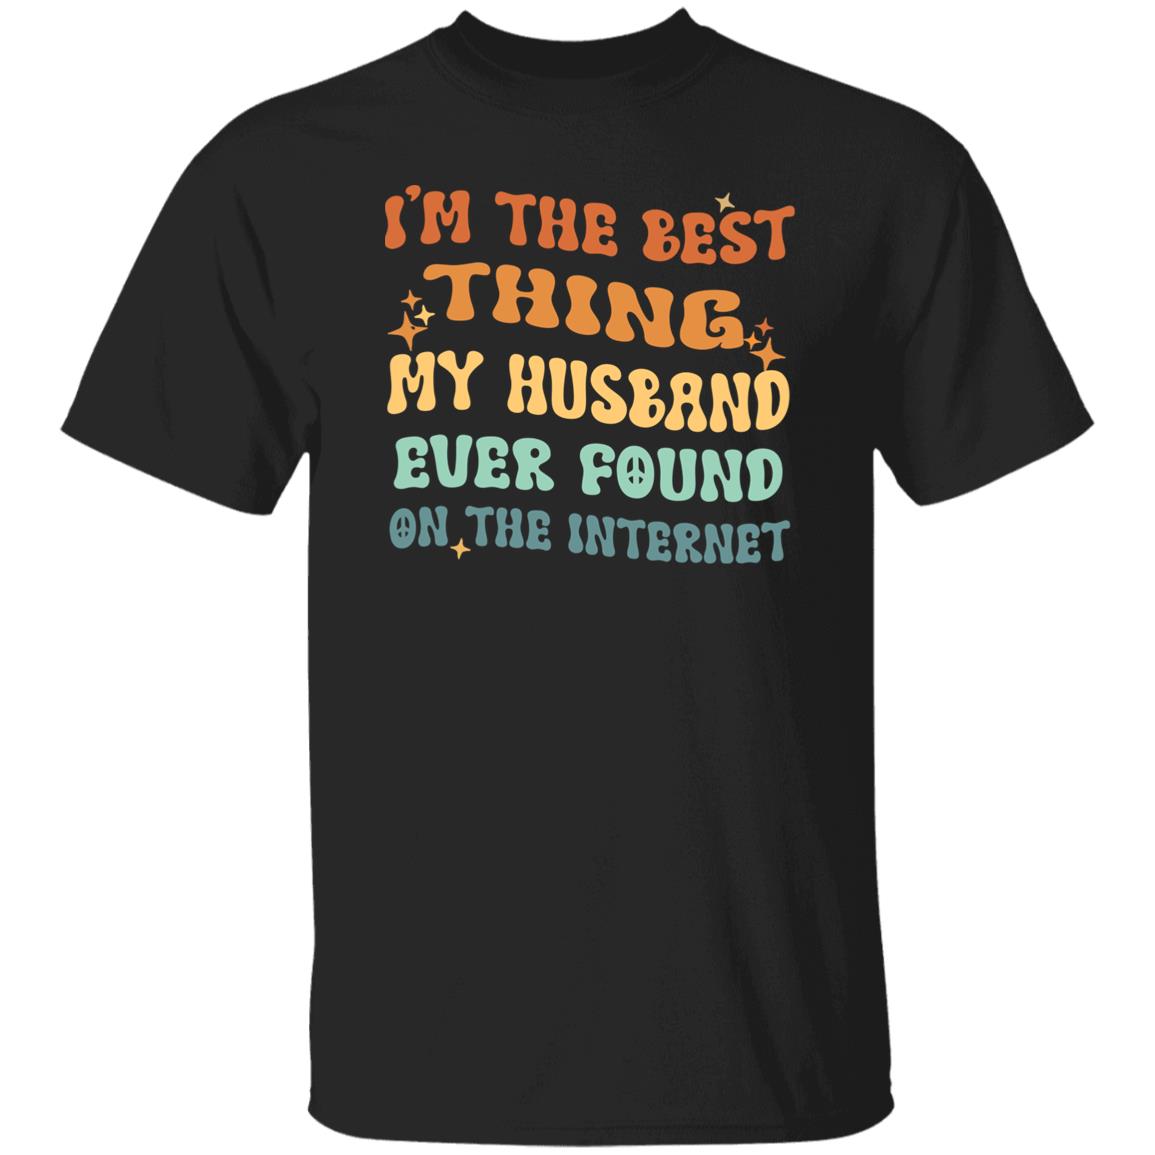 I'm The Best Thing My Husband Ever Found On The Internet Shirt